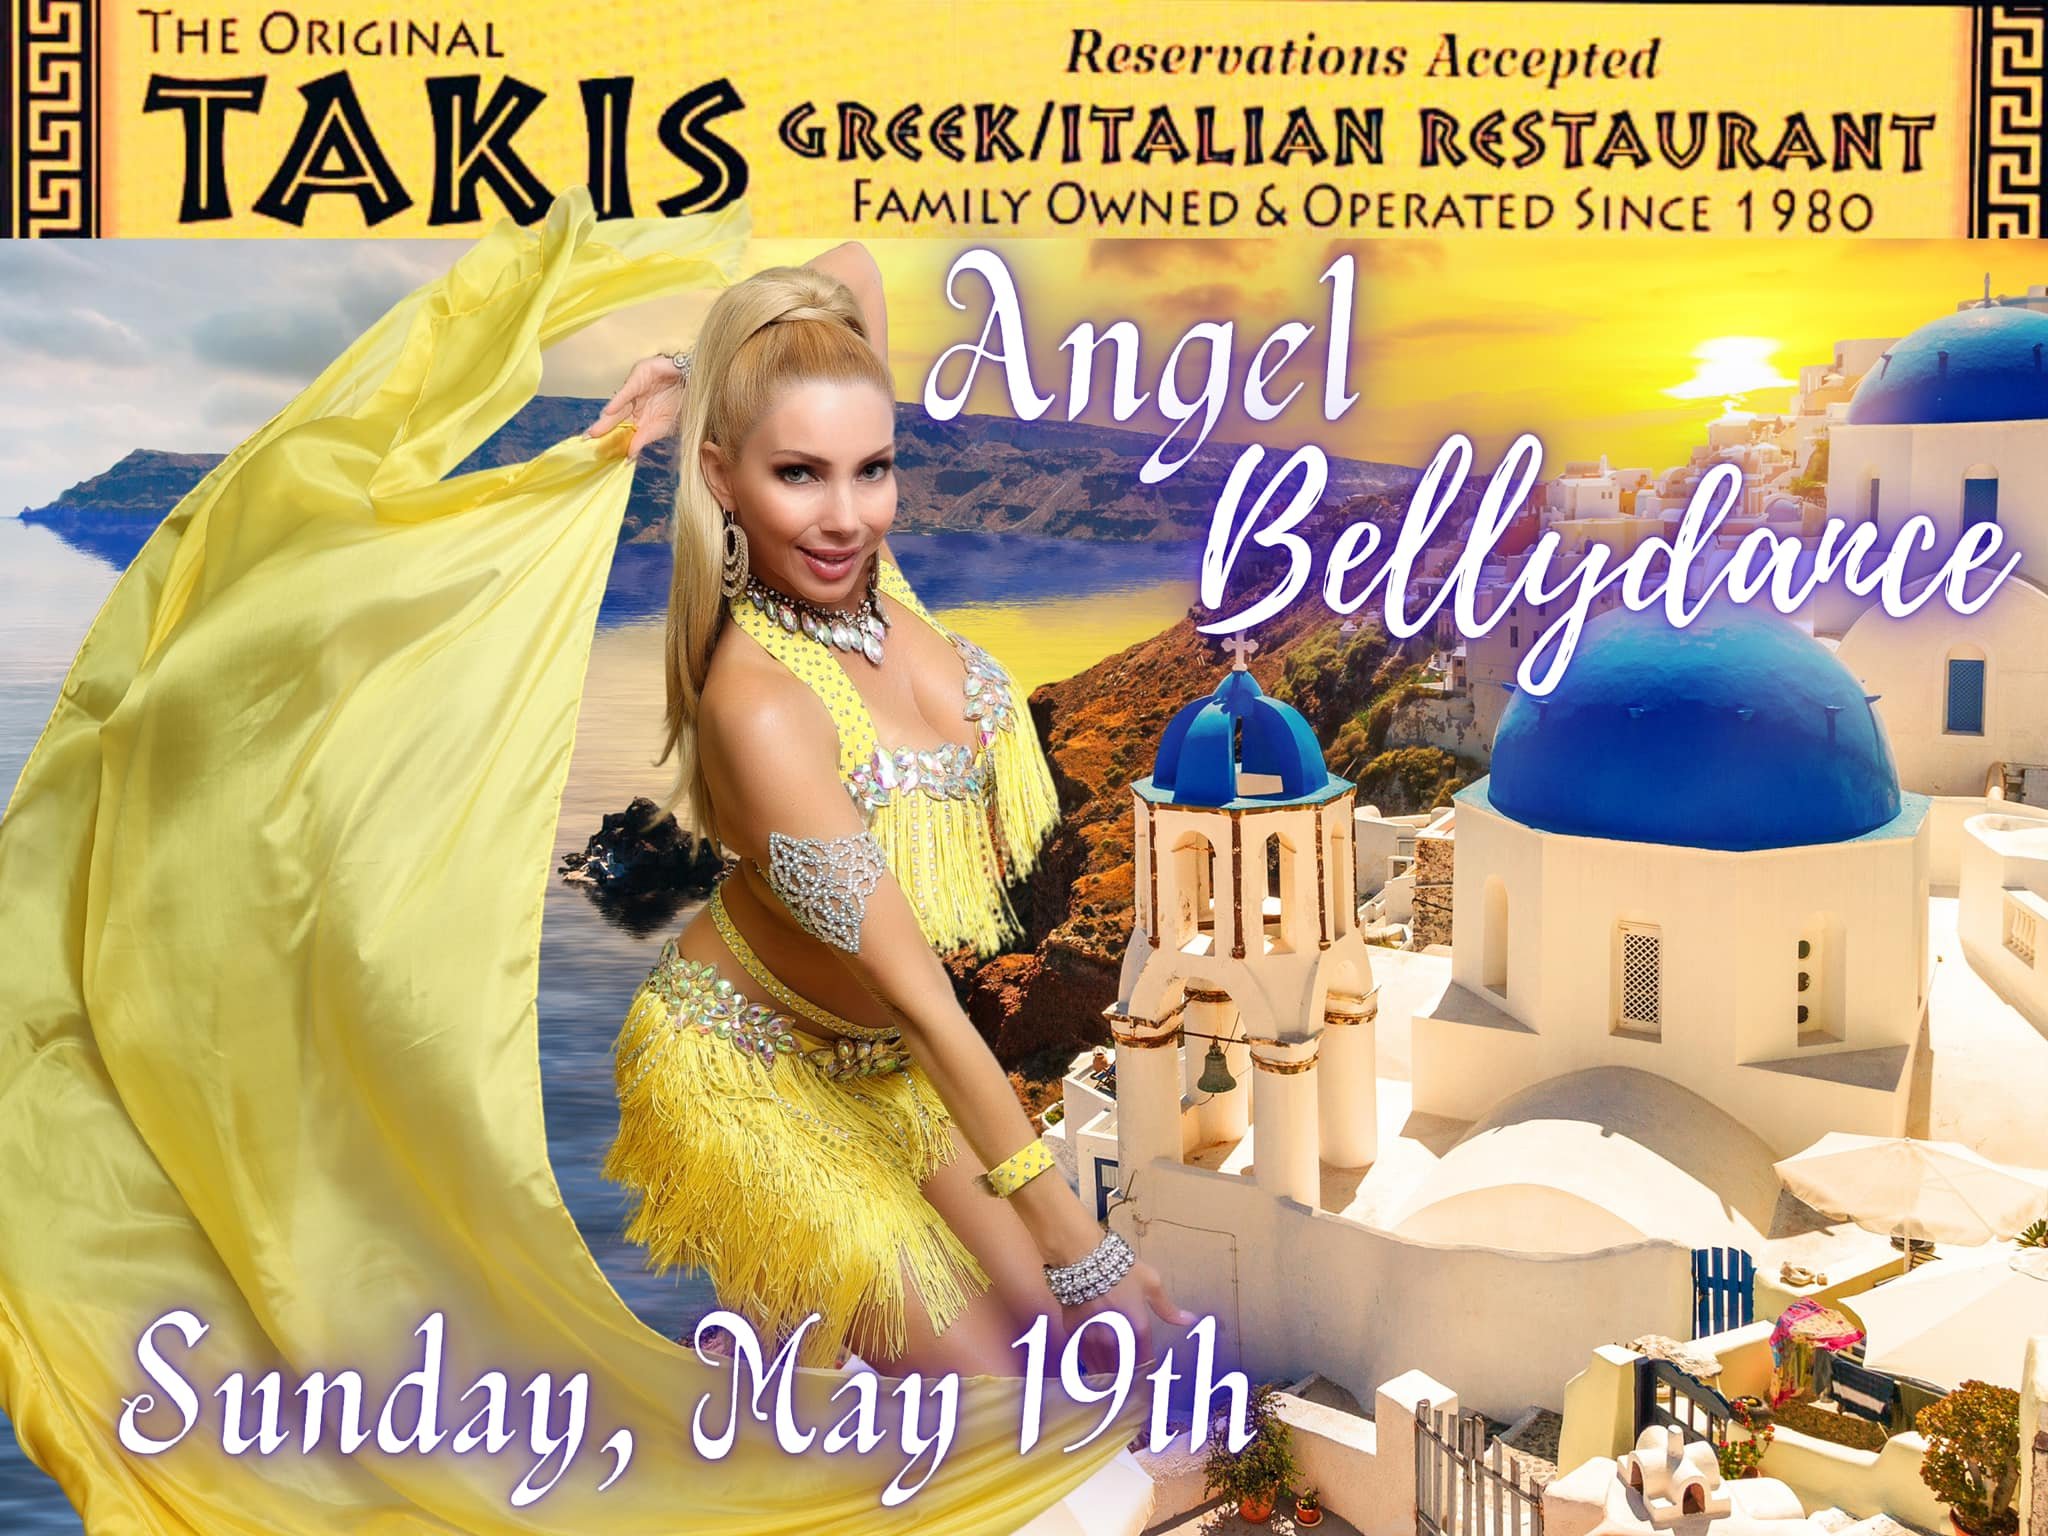 See you at Takis Greek Italian Restaurant on Sunday! Call for reservations 430-3630!!